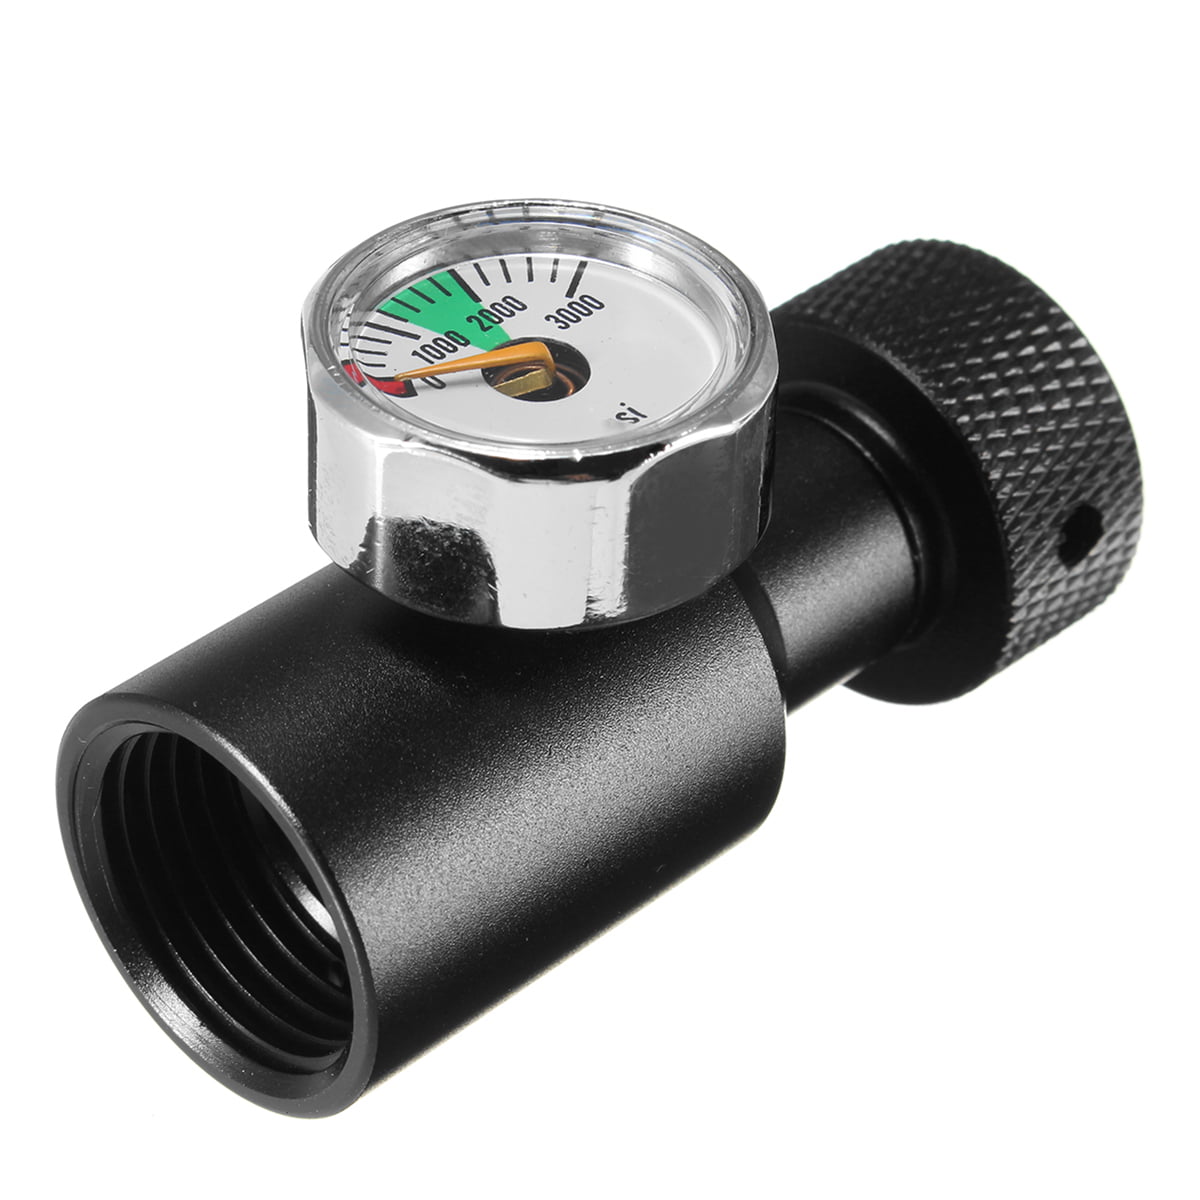 Rehomy CO2 Fill Adapter Air Regulator Paintball Remote Fill Adapter & Station On/Off 3000psi Gauge